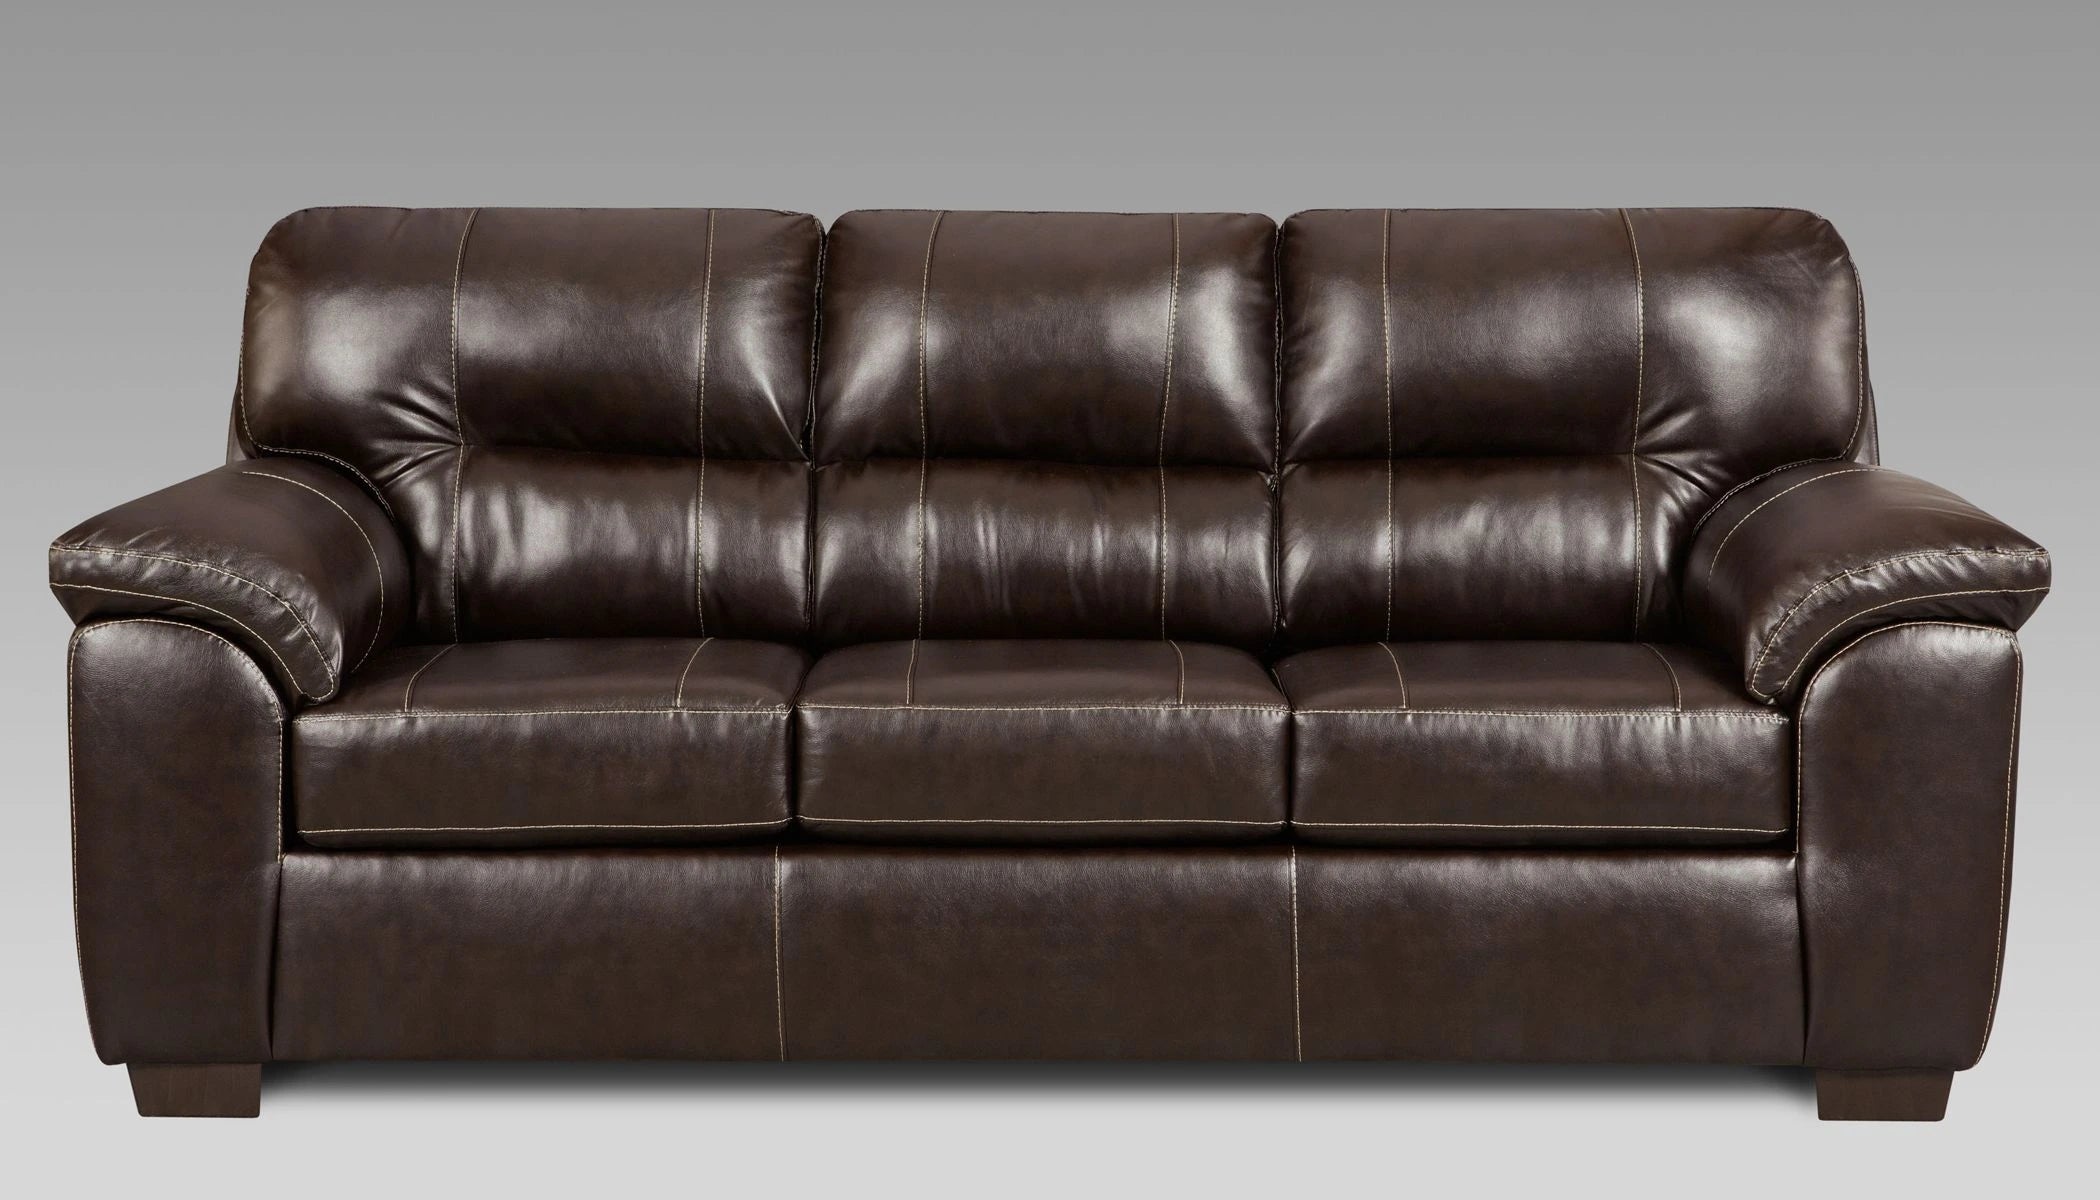 5603 AUSTIN BROWN Queen Sleeper Sofa   Made in The USA!